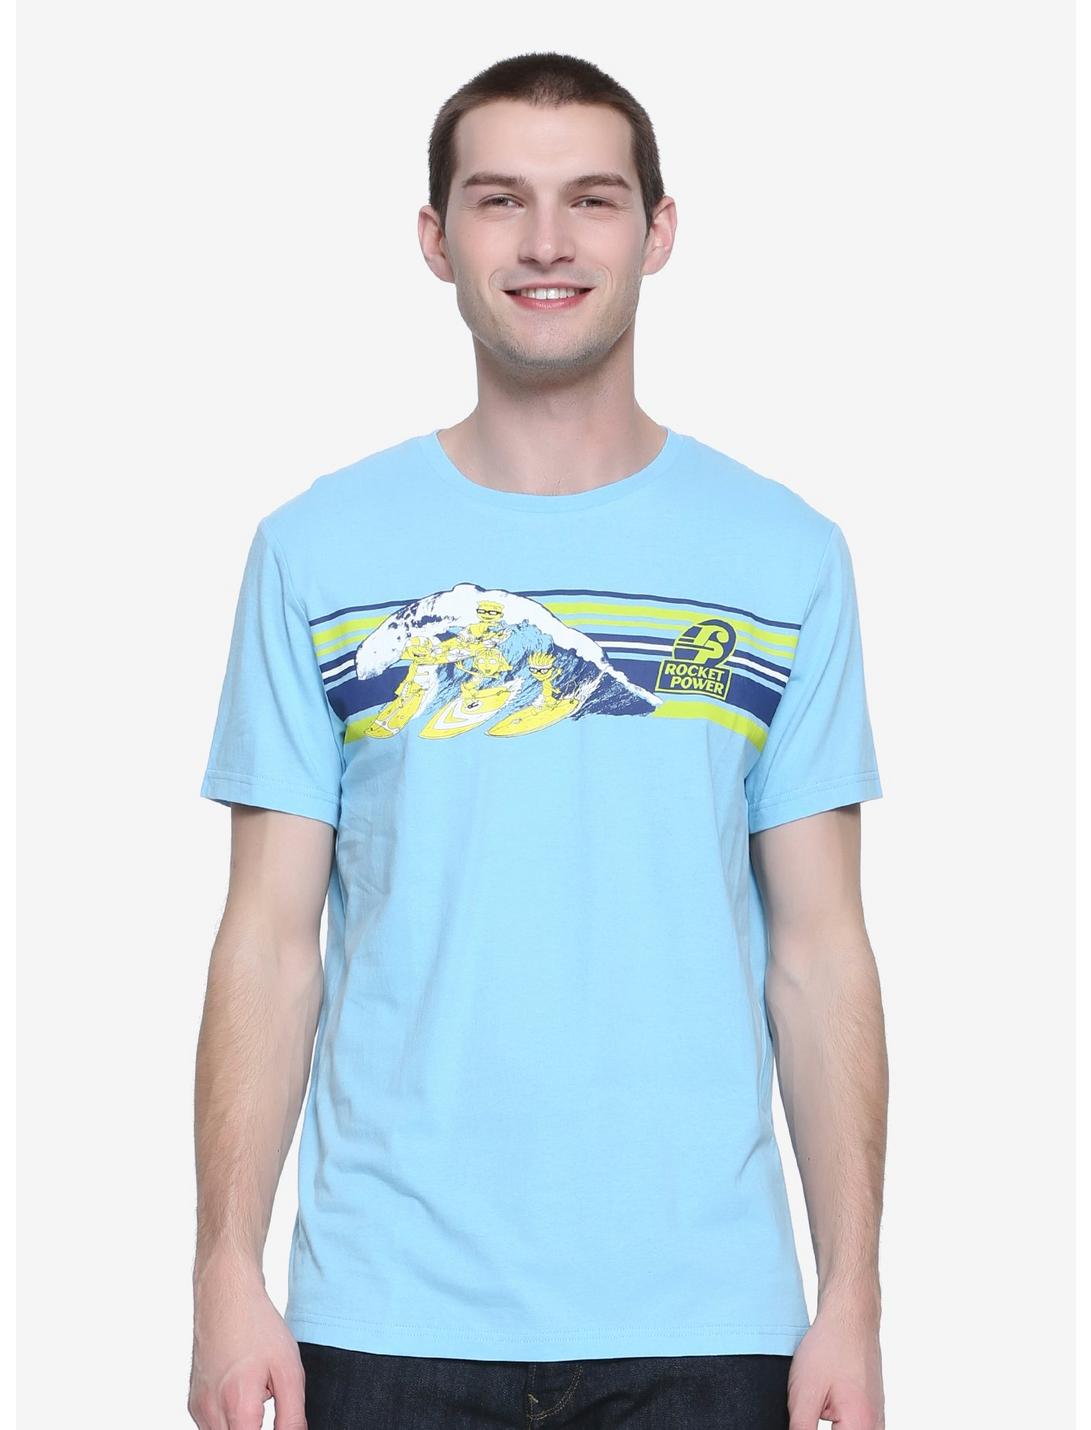 Rocket Power Striped T-Shirt - BoxLunch Exclusive, BLUE, hi-res